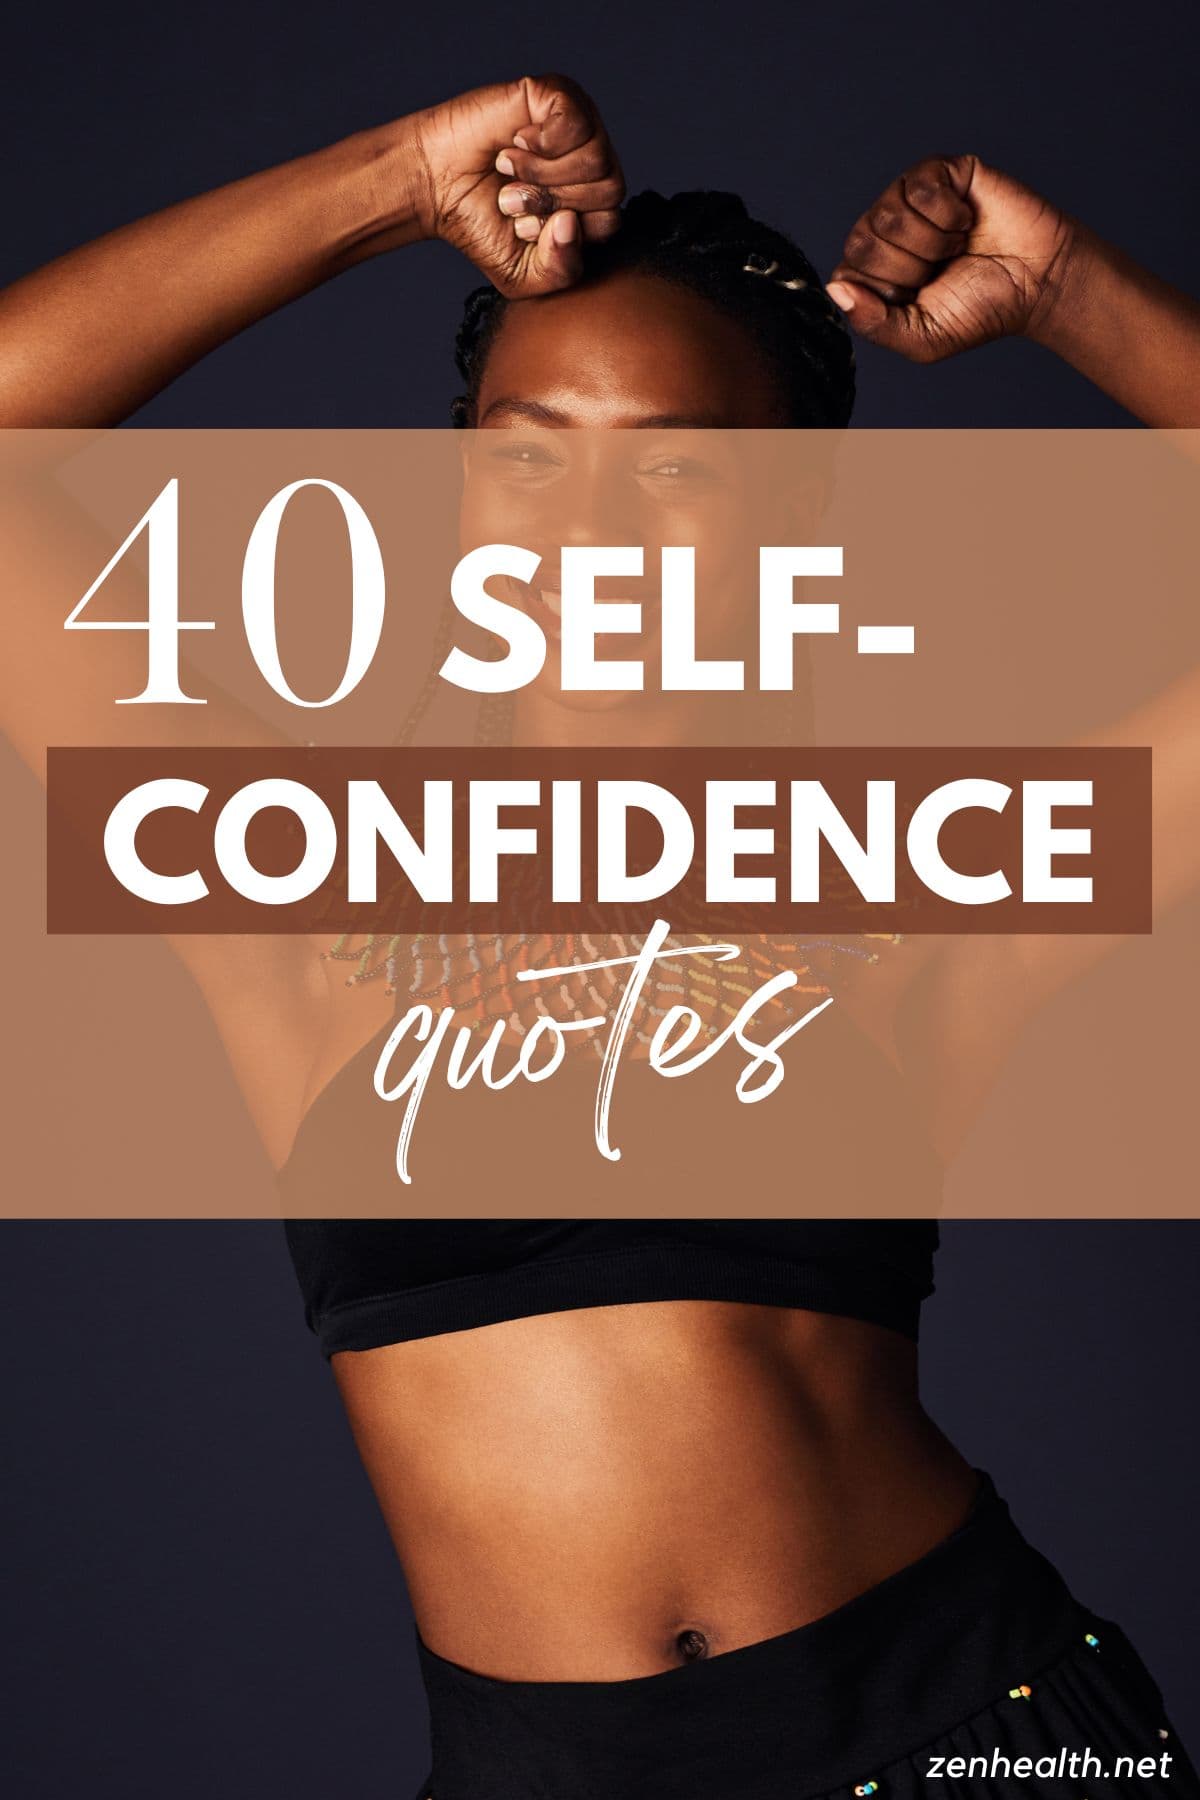 40 self confidence quotes text overlay on a woman flexing her biceps in front of a dark background